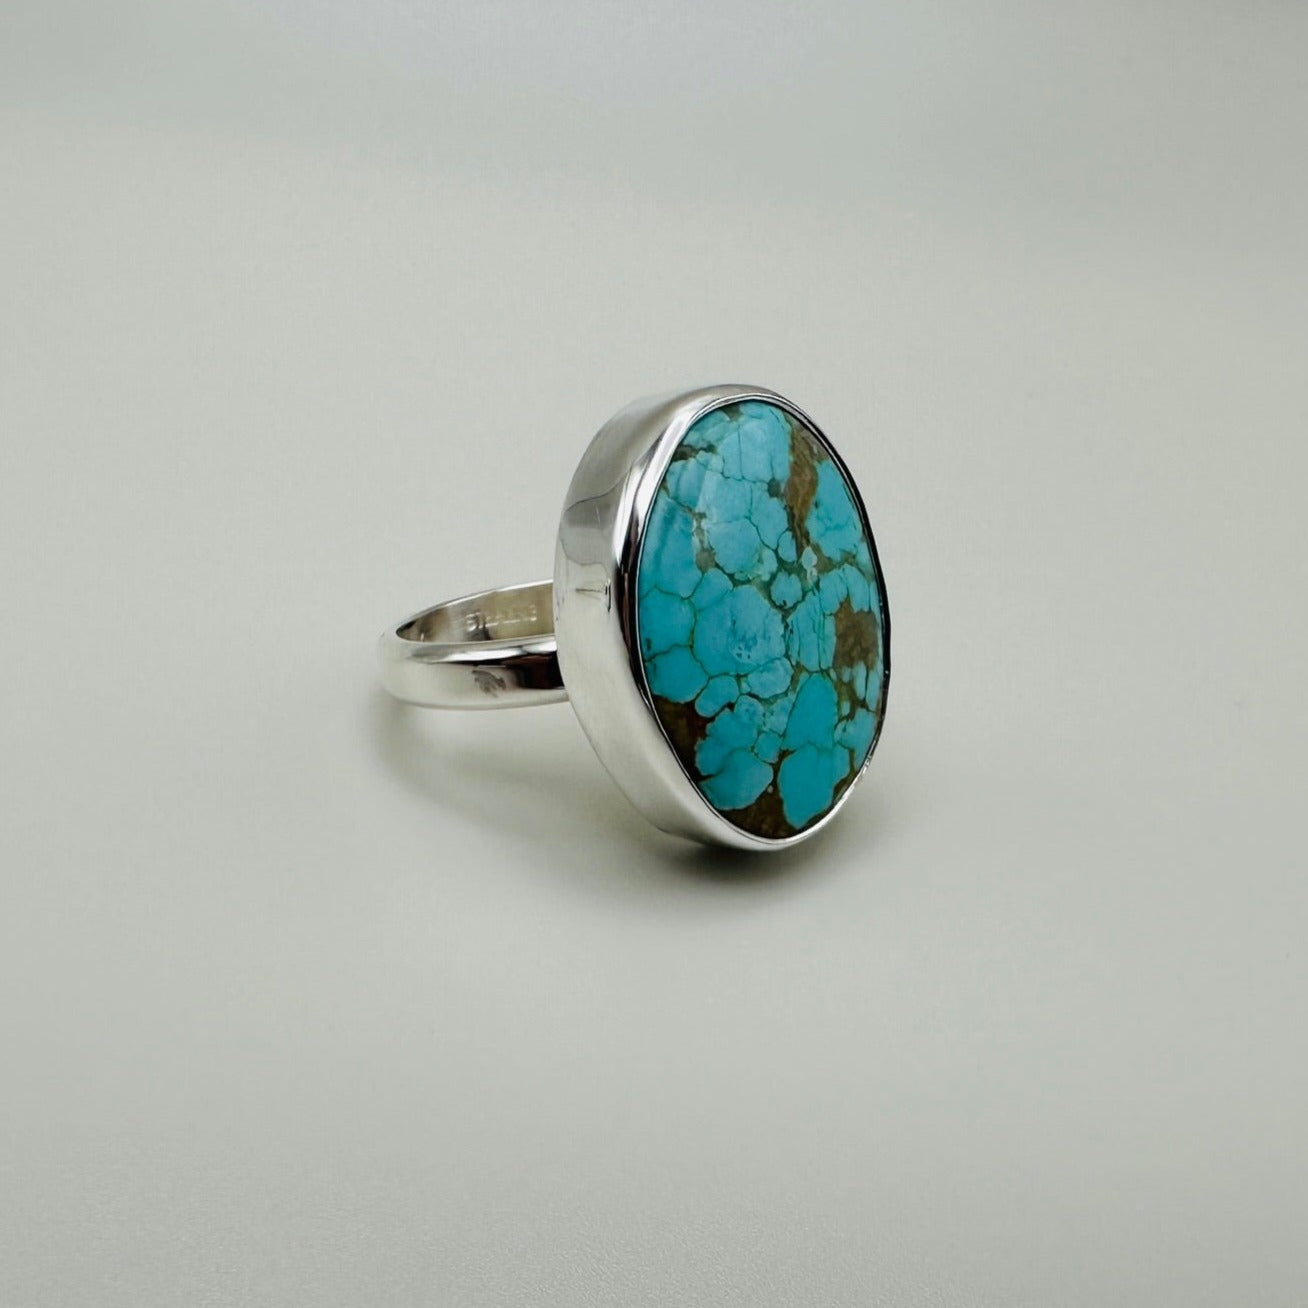 #8 Mine Turquoise Sterling Silver Ring, Size 7